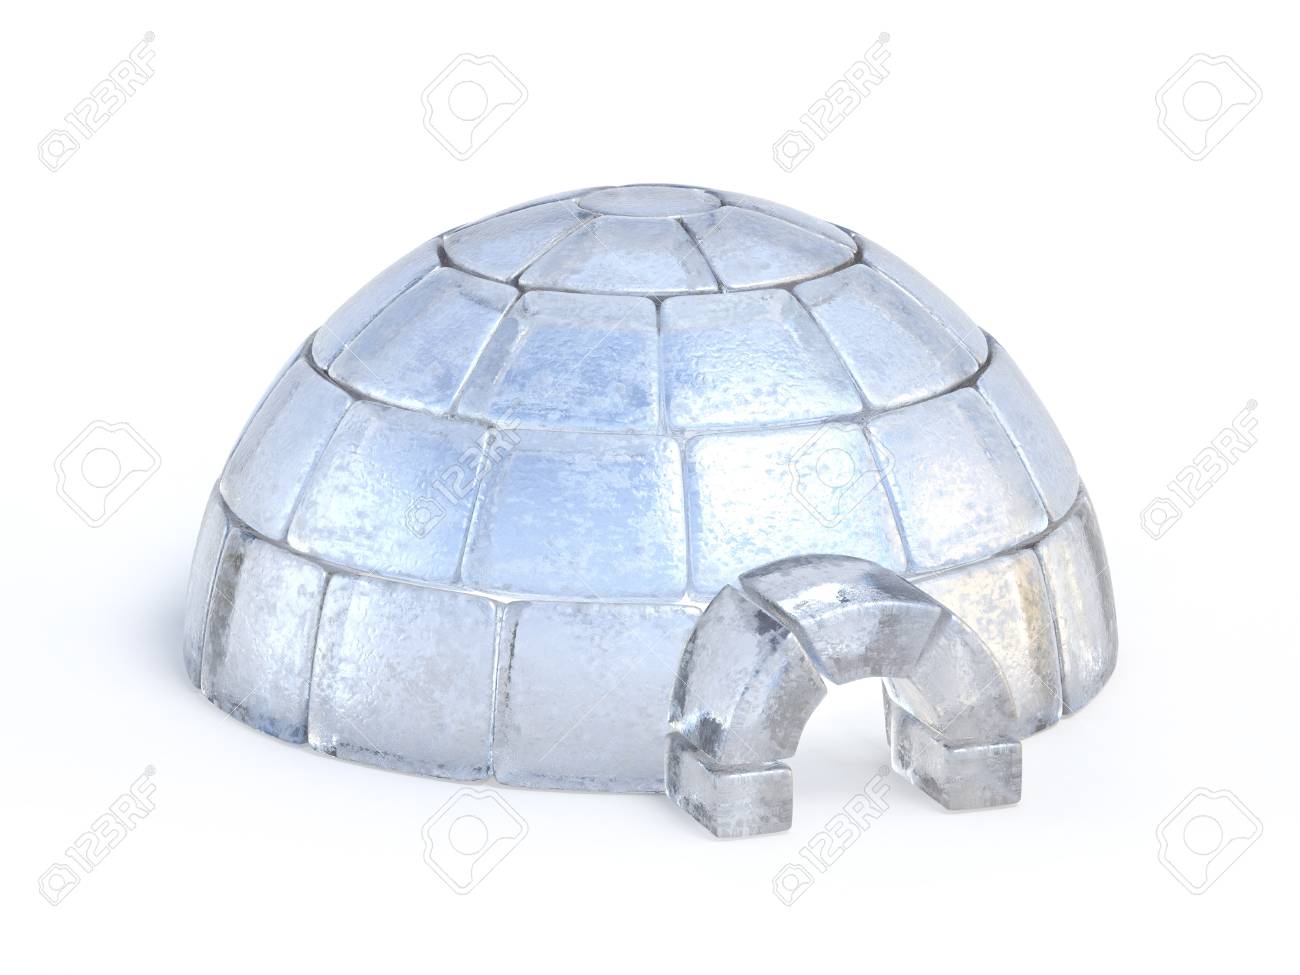 Igloo Made Of Ice Blocks Isolated On The White Background 3d